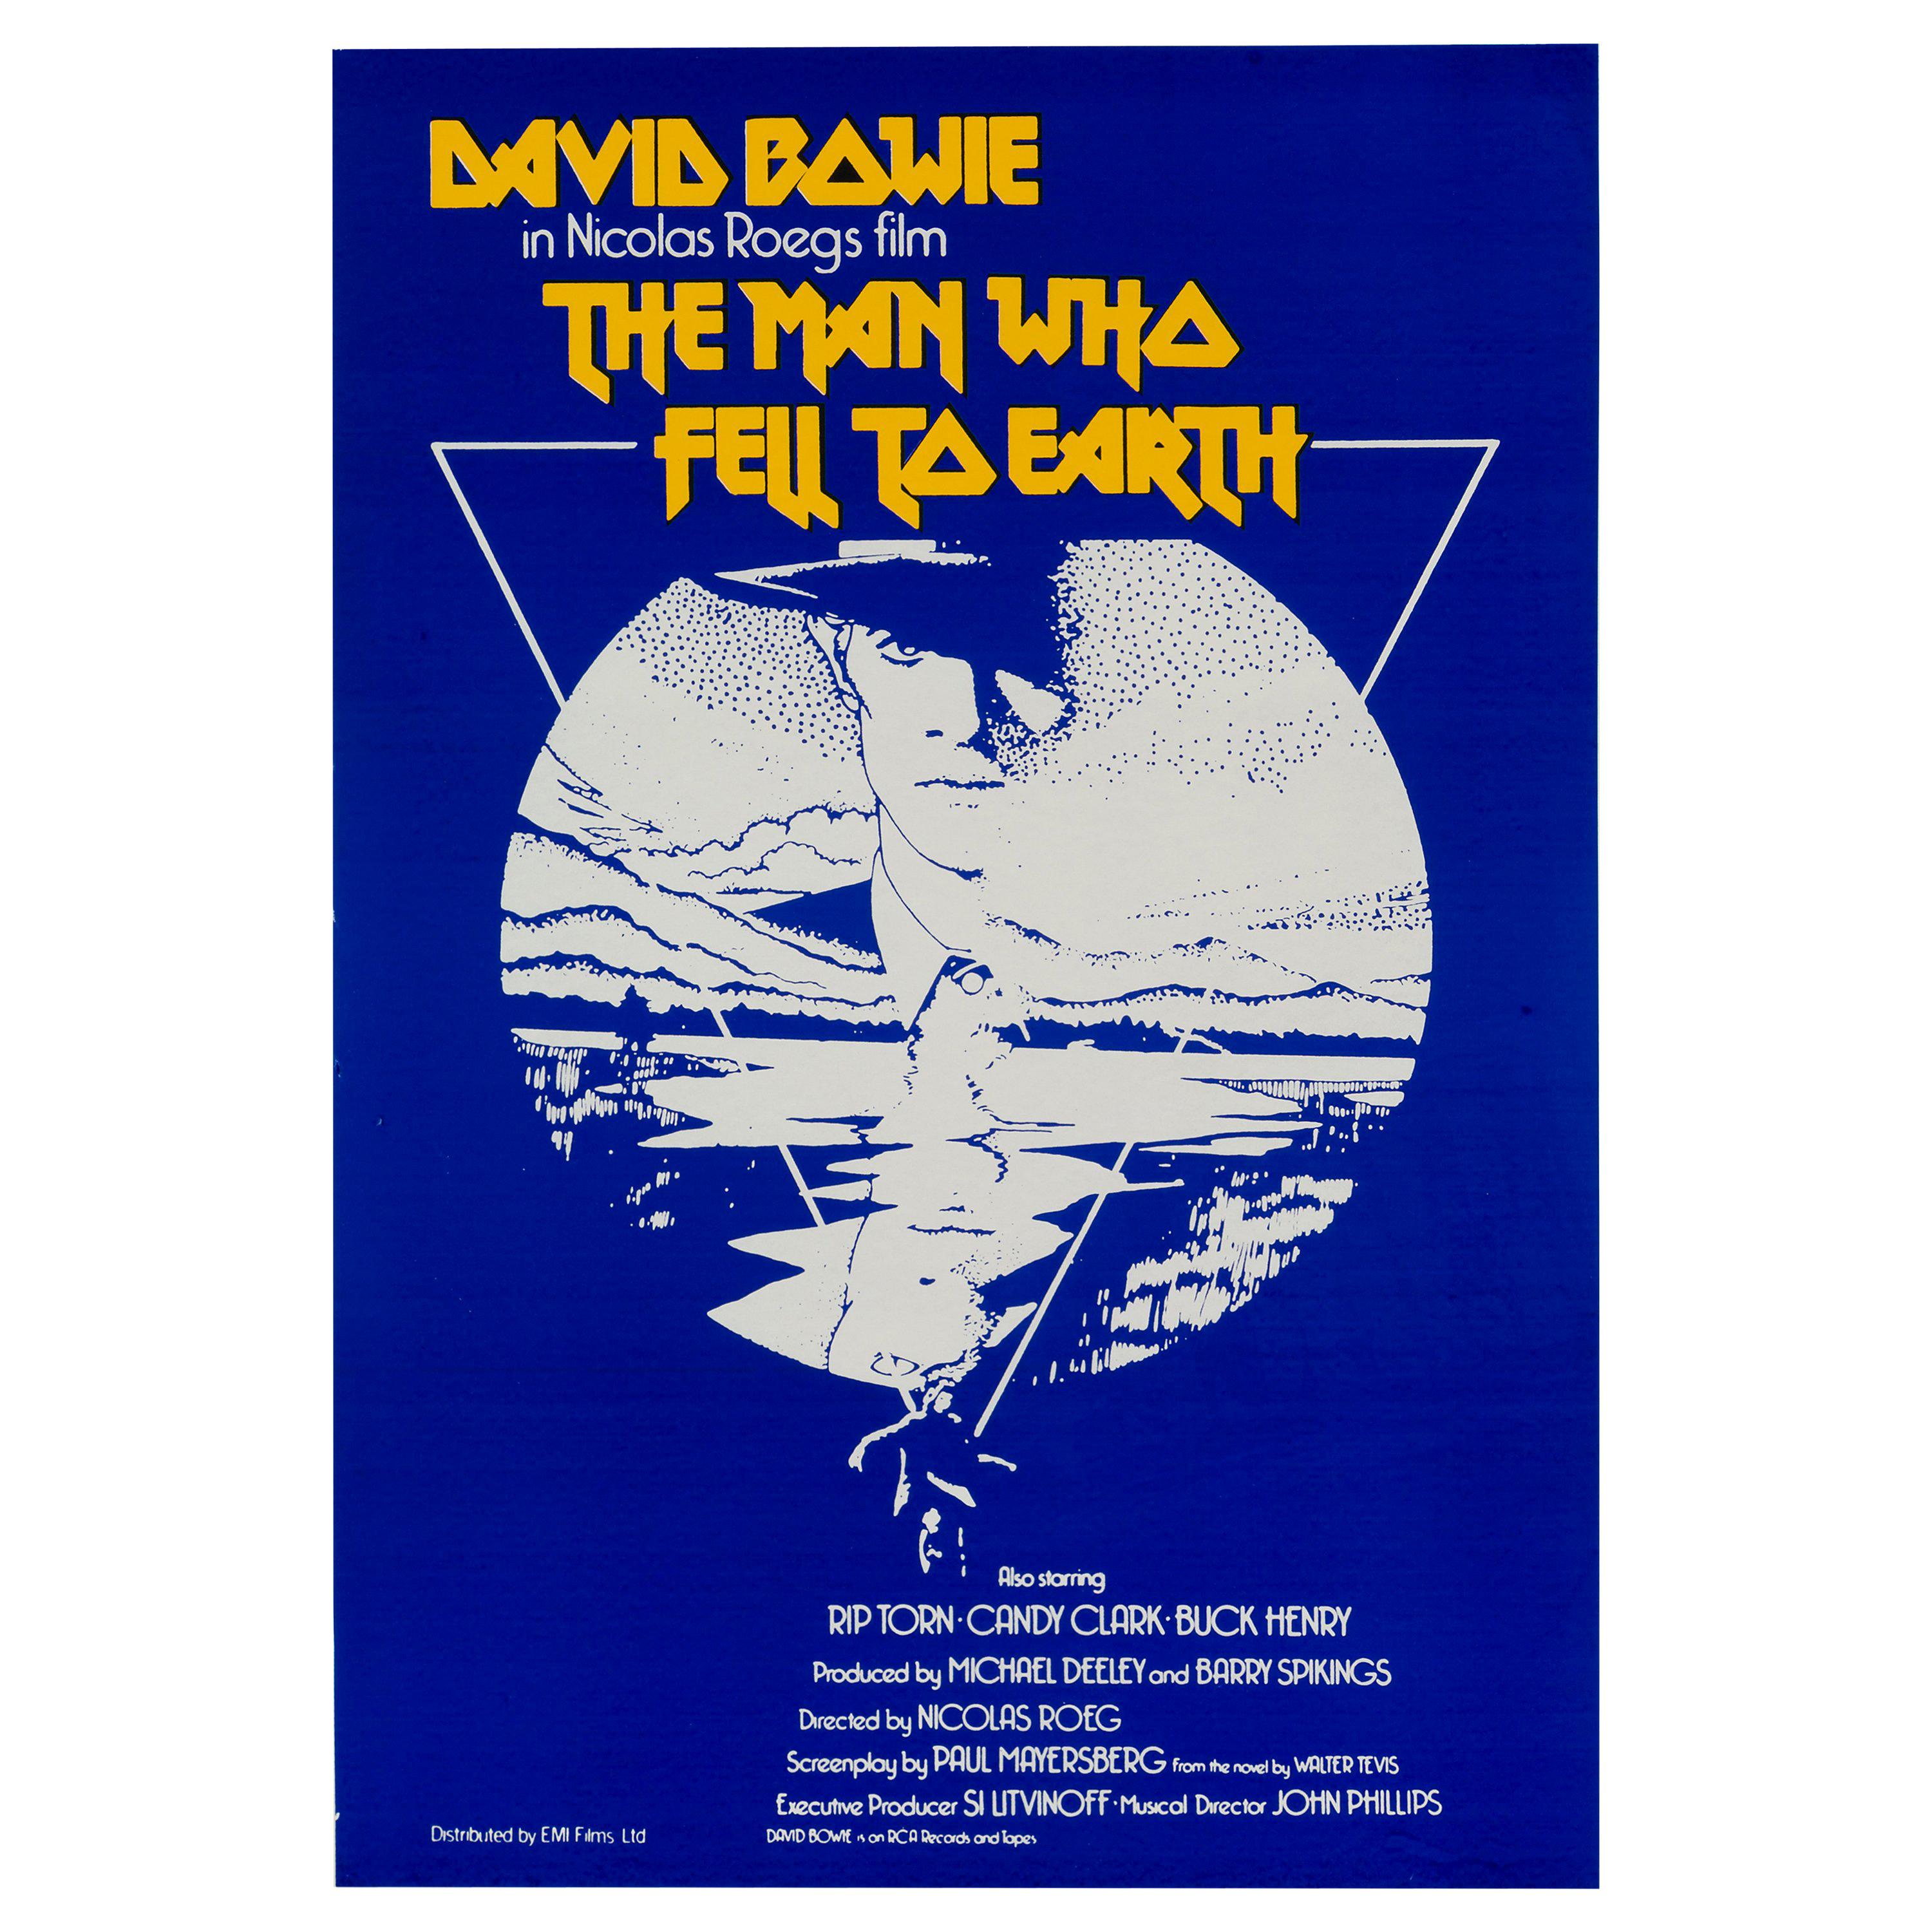 David Bowie "The Man Who Fell To Earth" Vintage Movie Poster, British, 1976